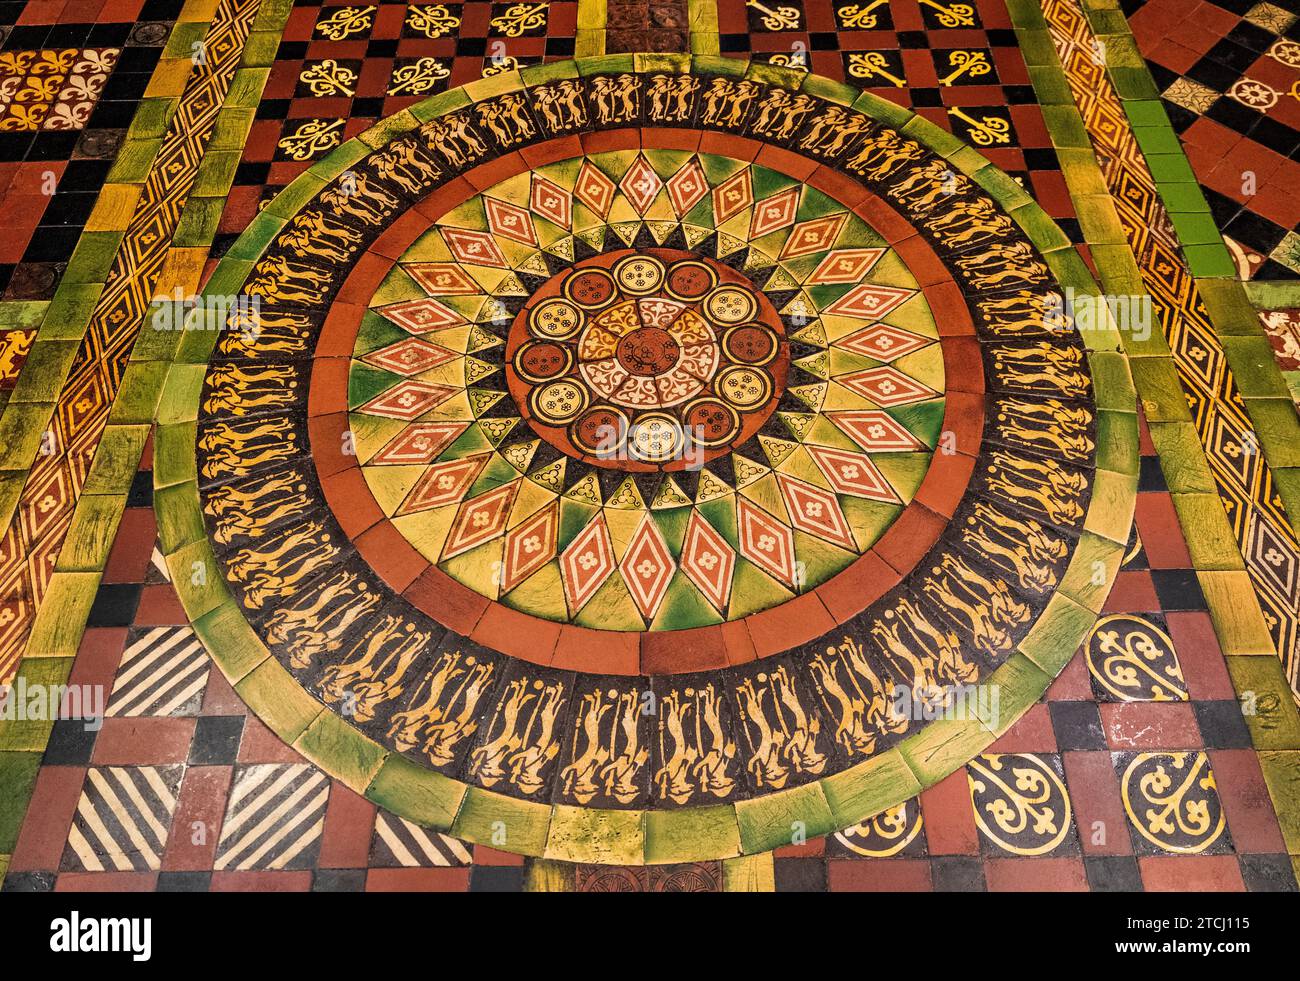 Colorful pavement with circular design in Christchurch Cathedral, medieval church built in 11th century, Dublin city center, Ireland. Stock Photo